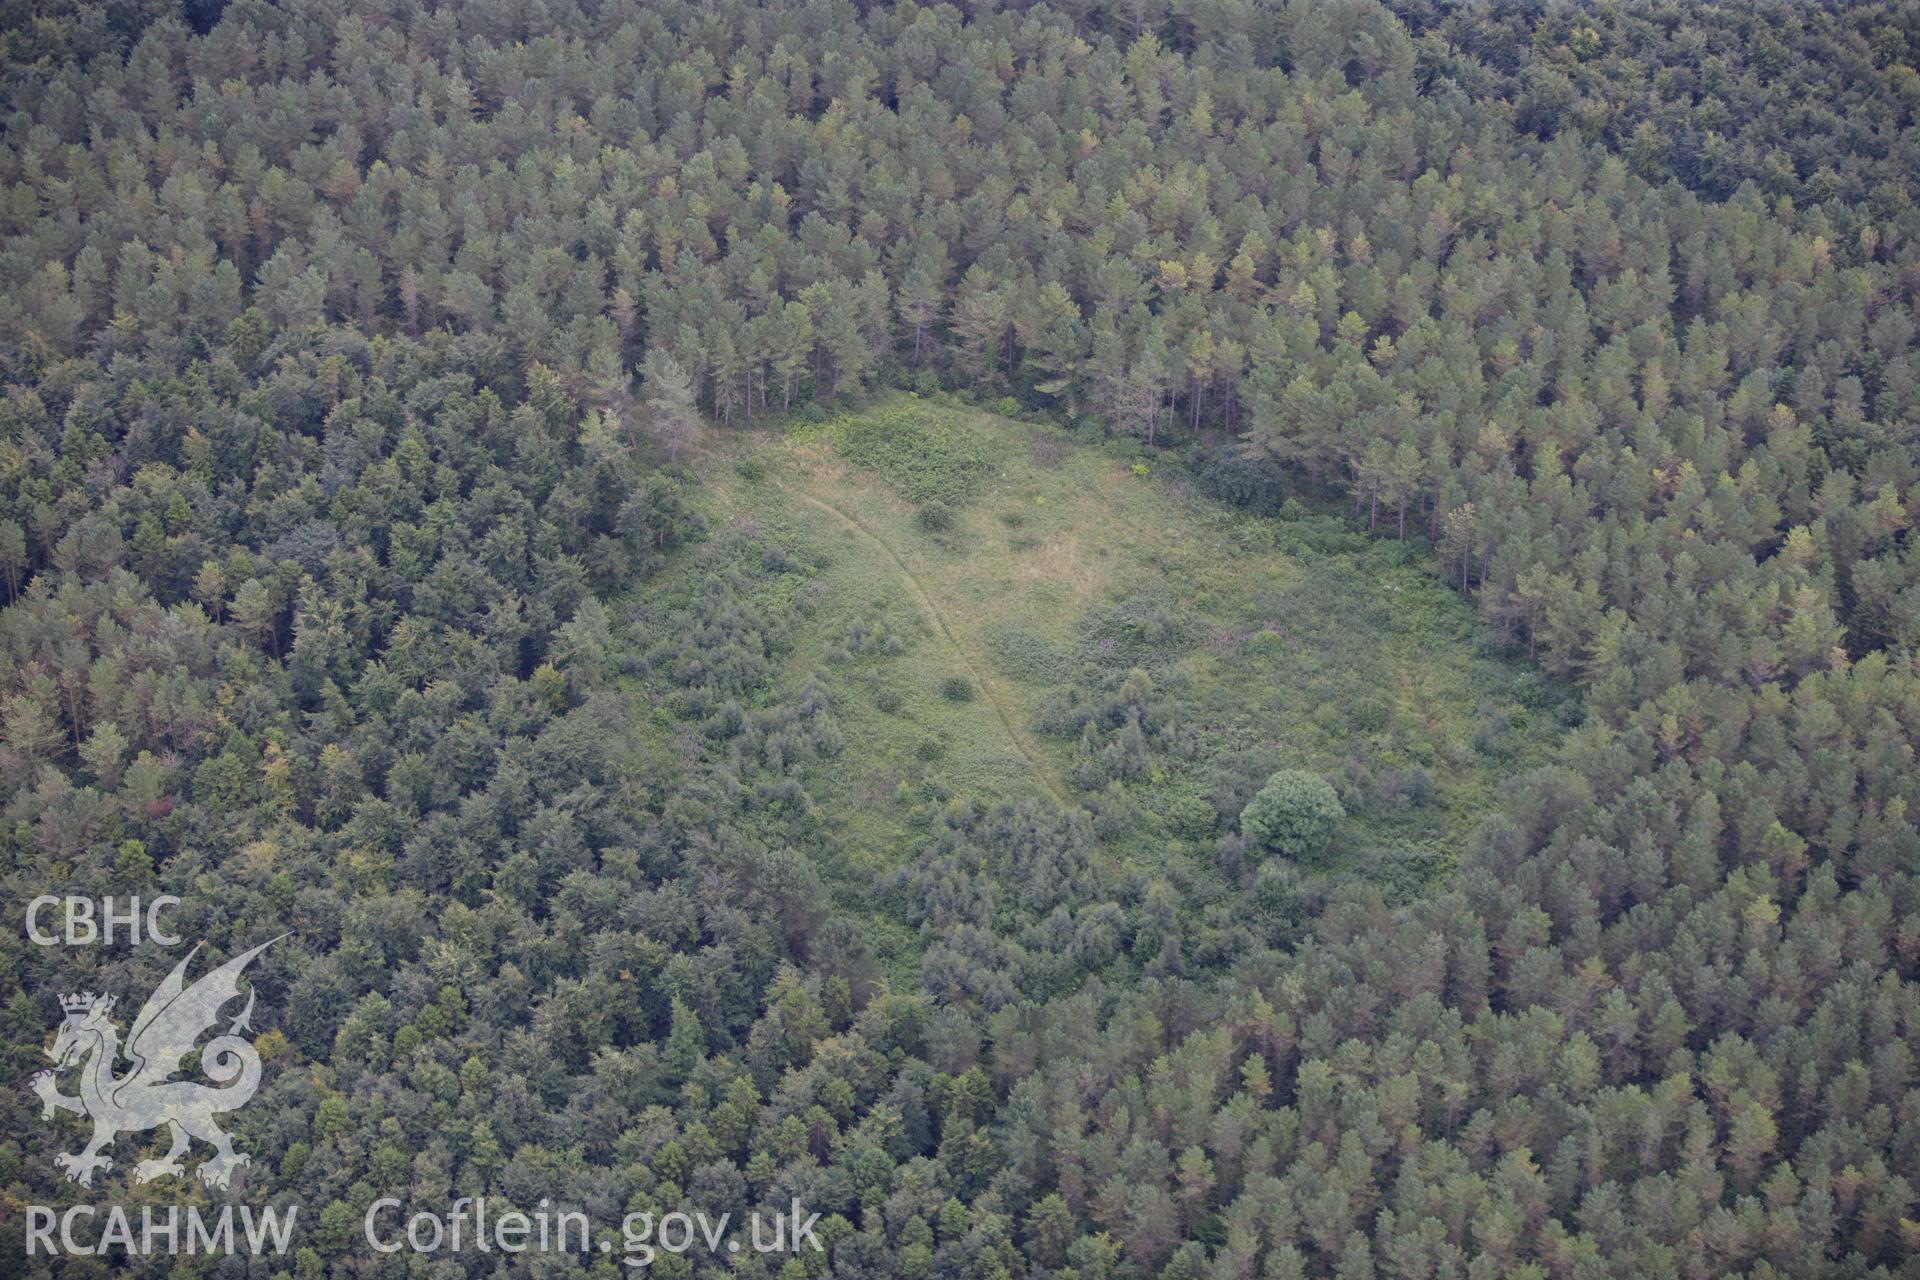 RCAHMW colour oblique aerial photograph of Glol Hill Enclosure. Taken on 30 July 2009 by Toby Driver